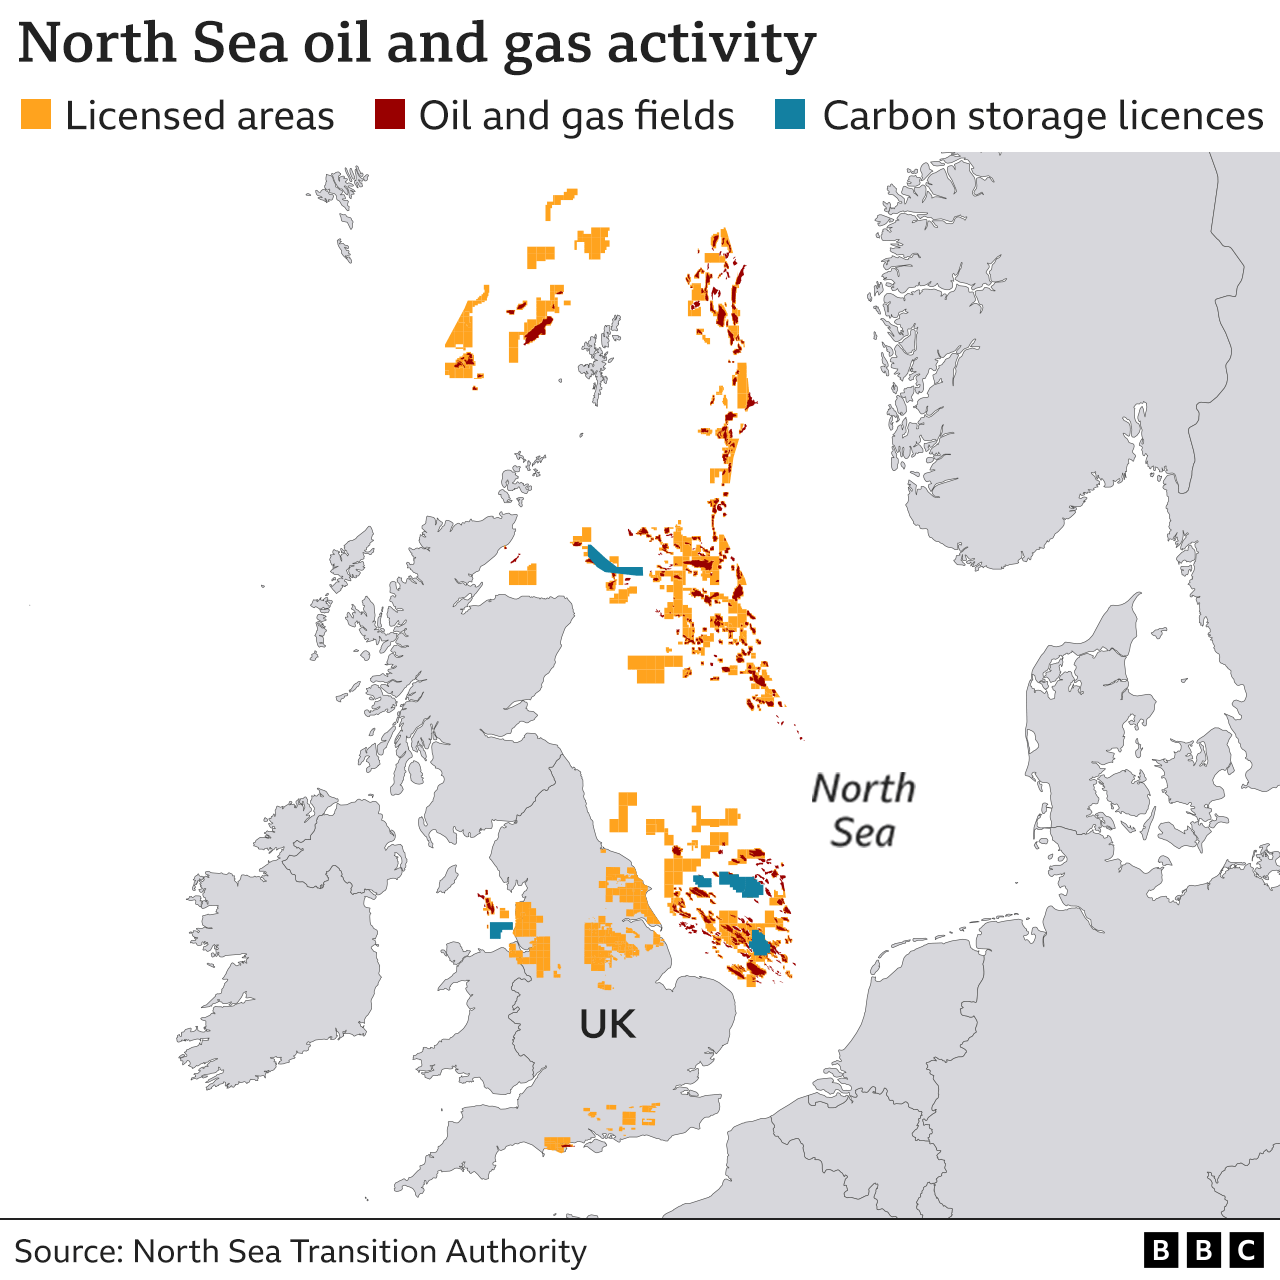 Map showing oil and gas activity